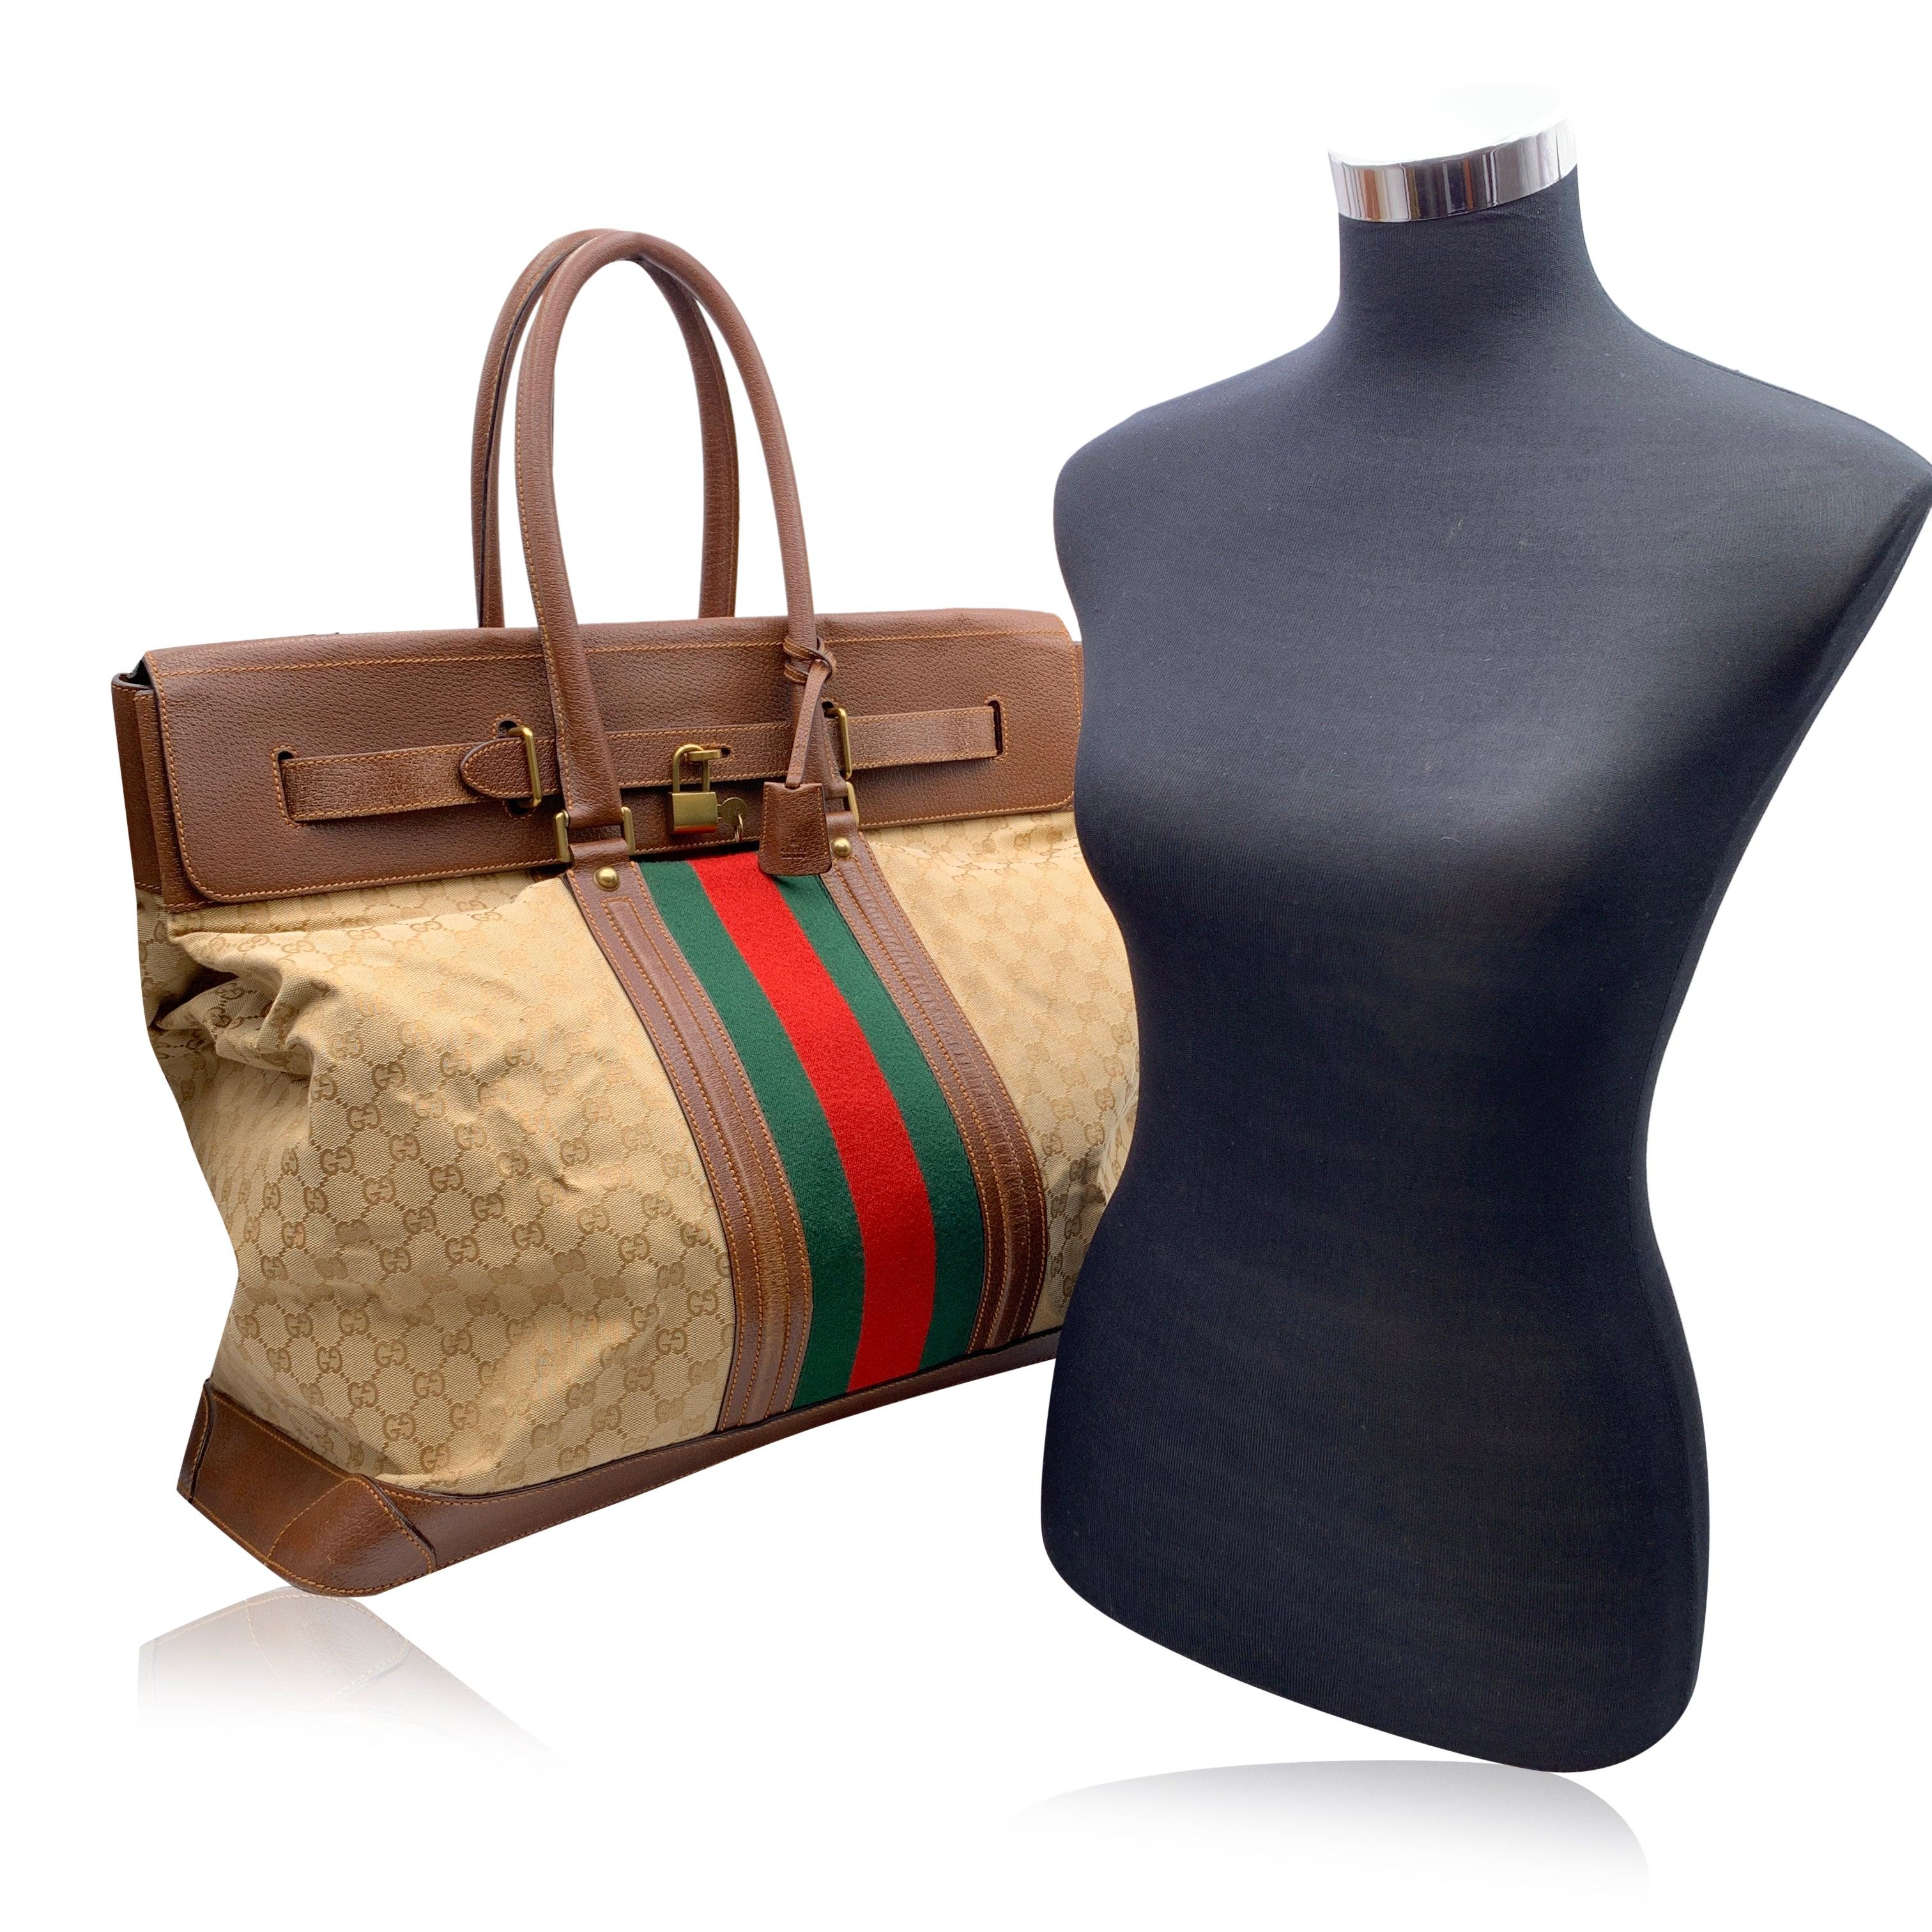 Gucci beige monogram canvas travel bag weekender bag. Brown leather trim and handles. Green/Red/Green stripes on the front and on the back. Double top carry handles. Iconic turnlock closure with sangle straps. Brown fabric lining. 1 side zip pocket